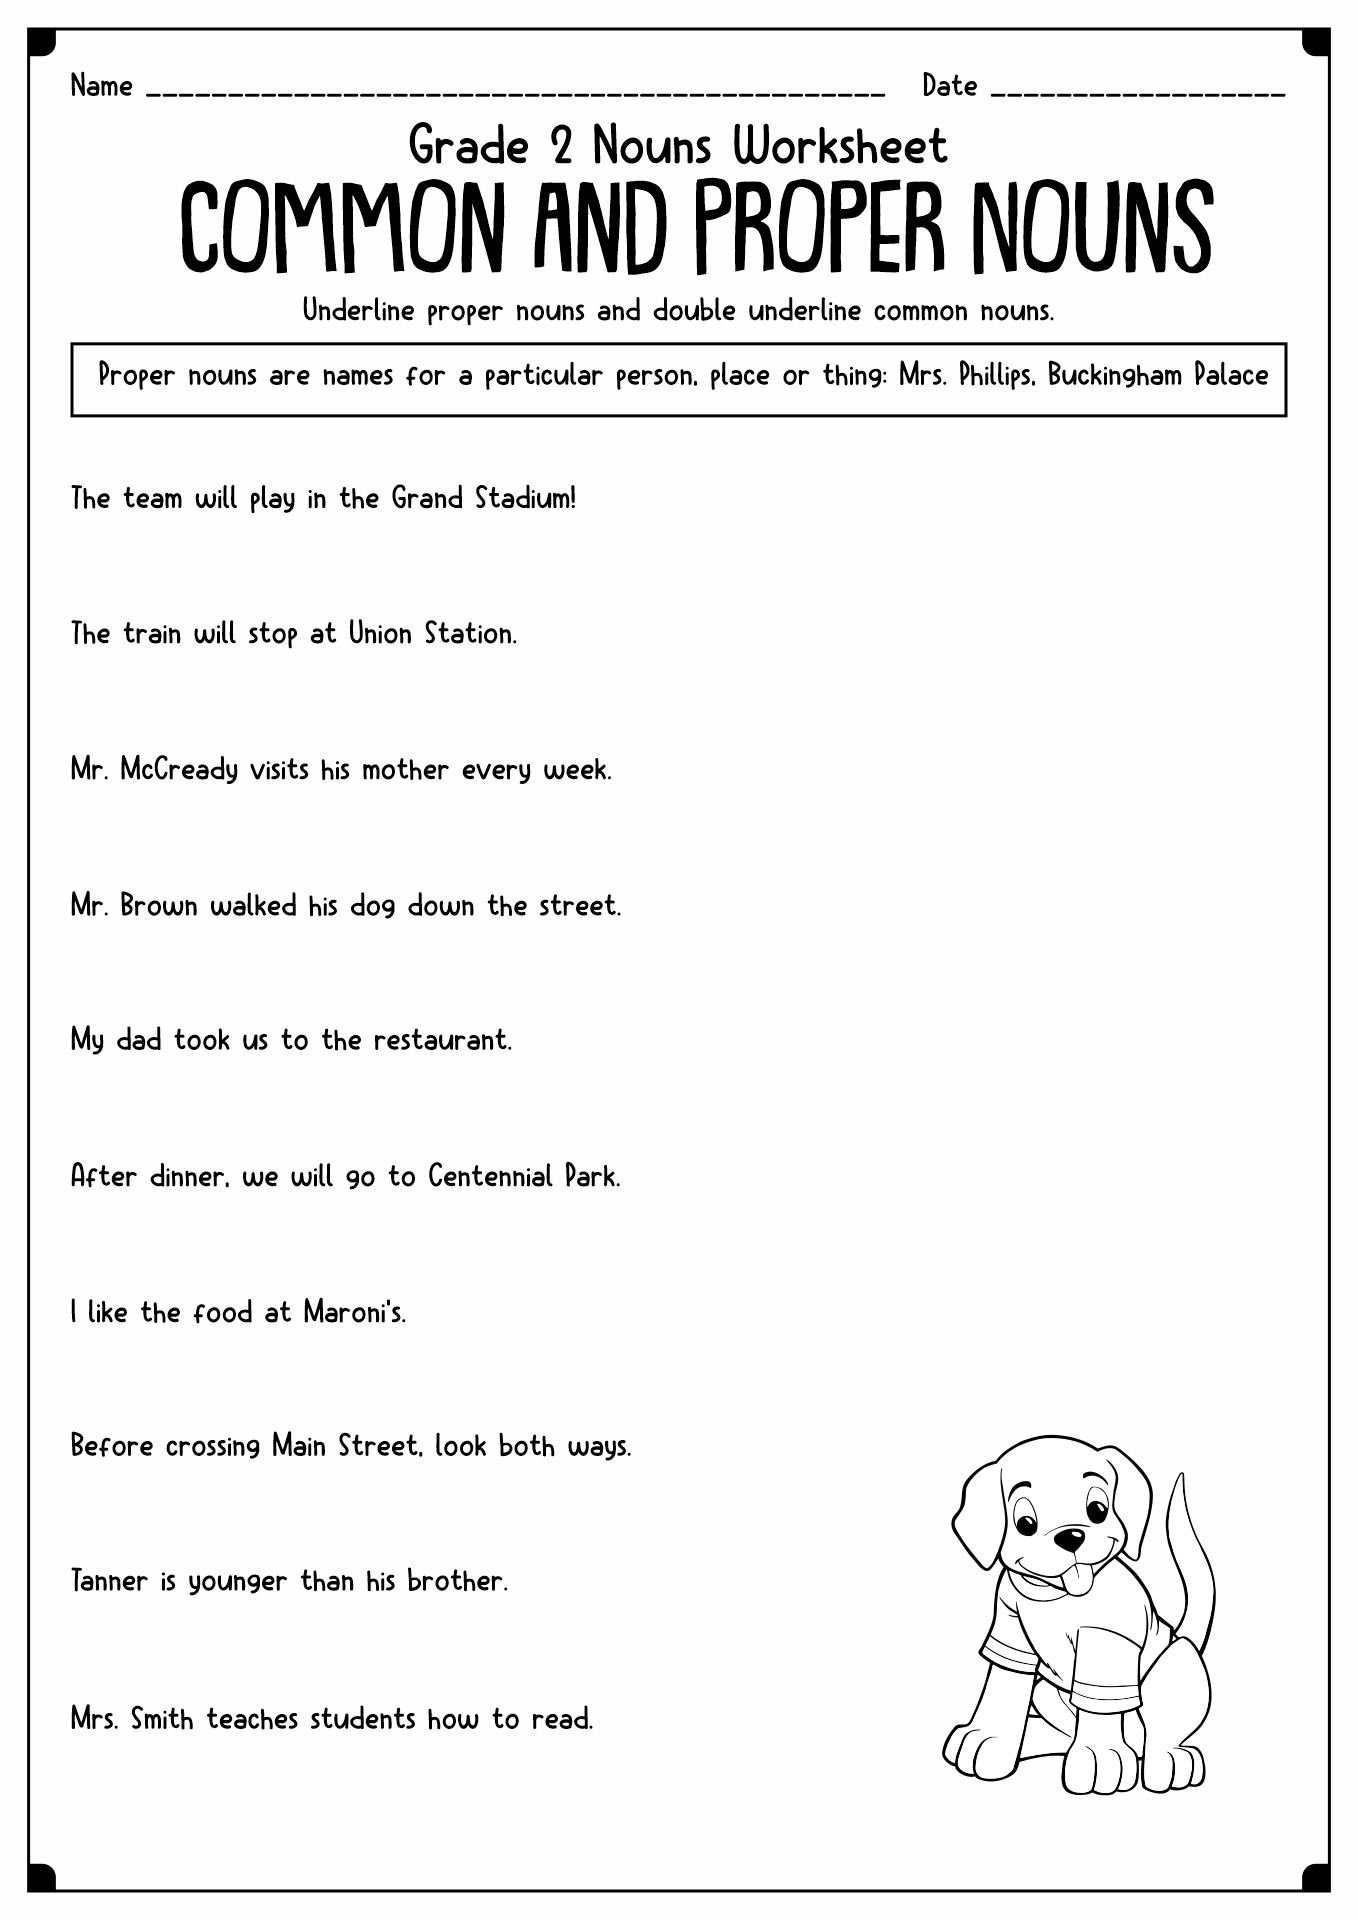 Common and Proper Nouns Worksheet 4th Grade Image